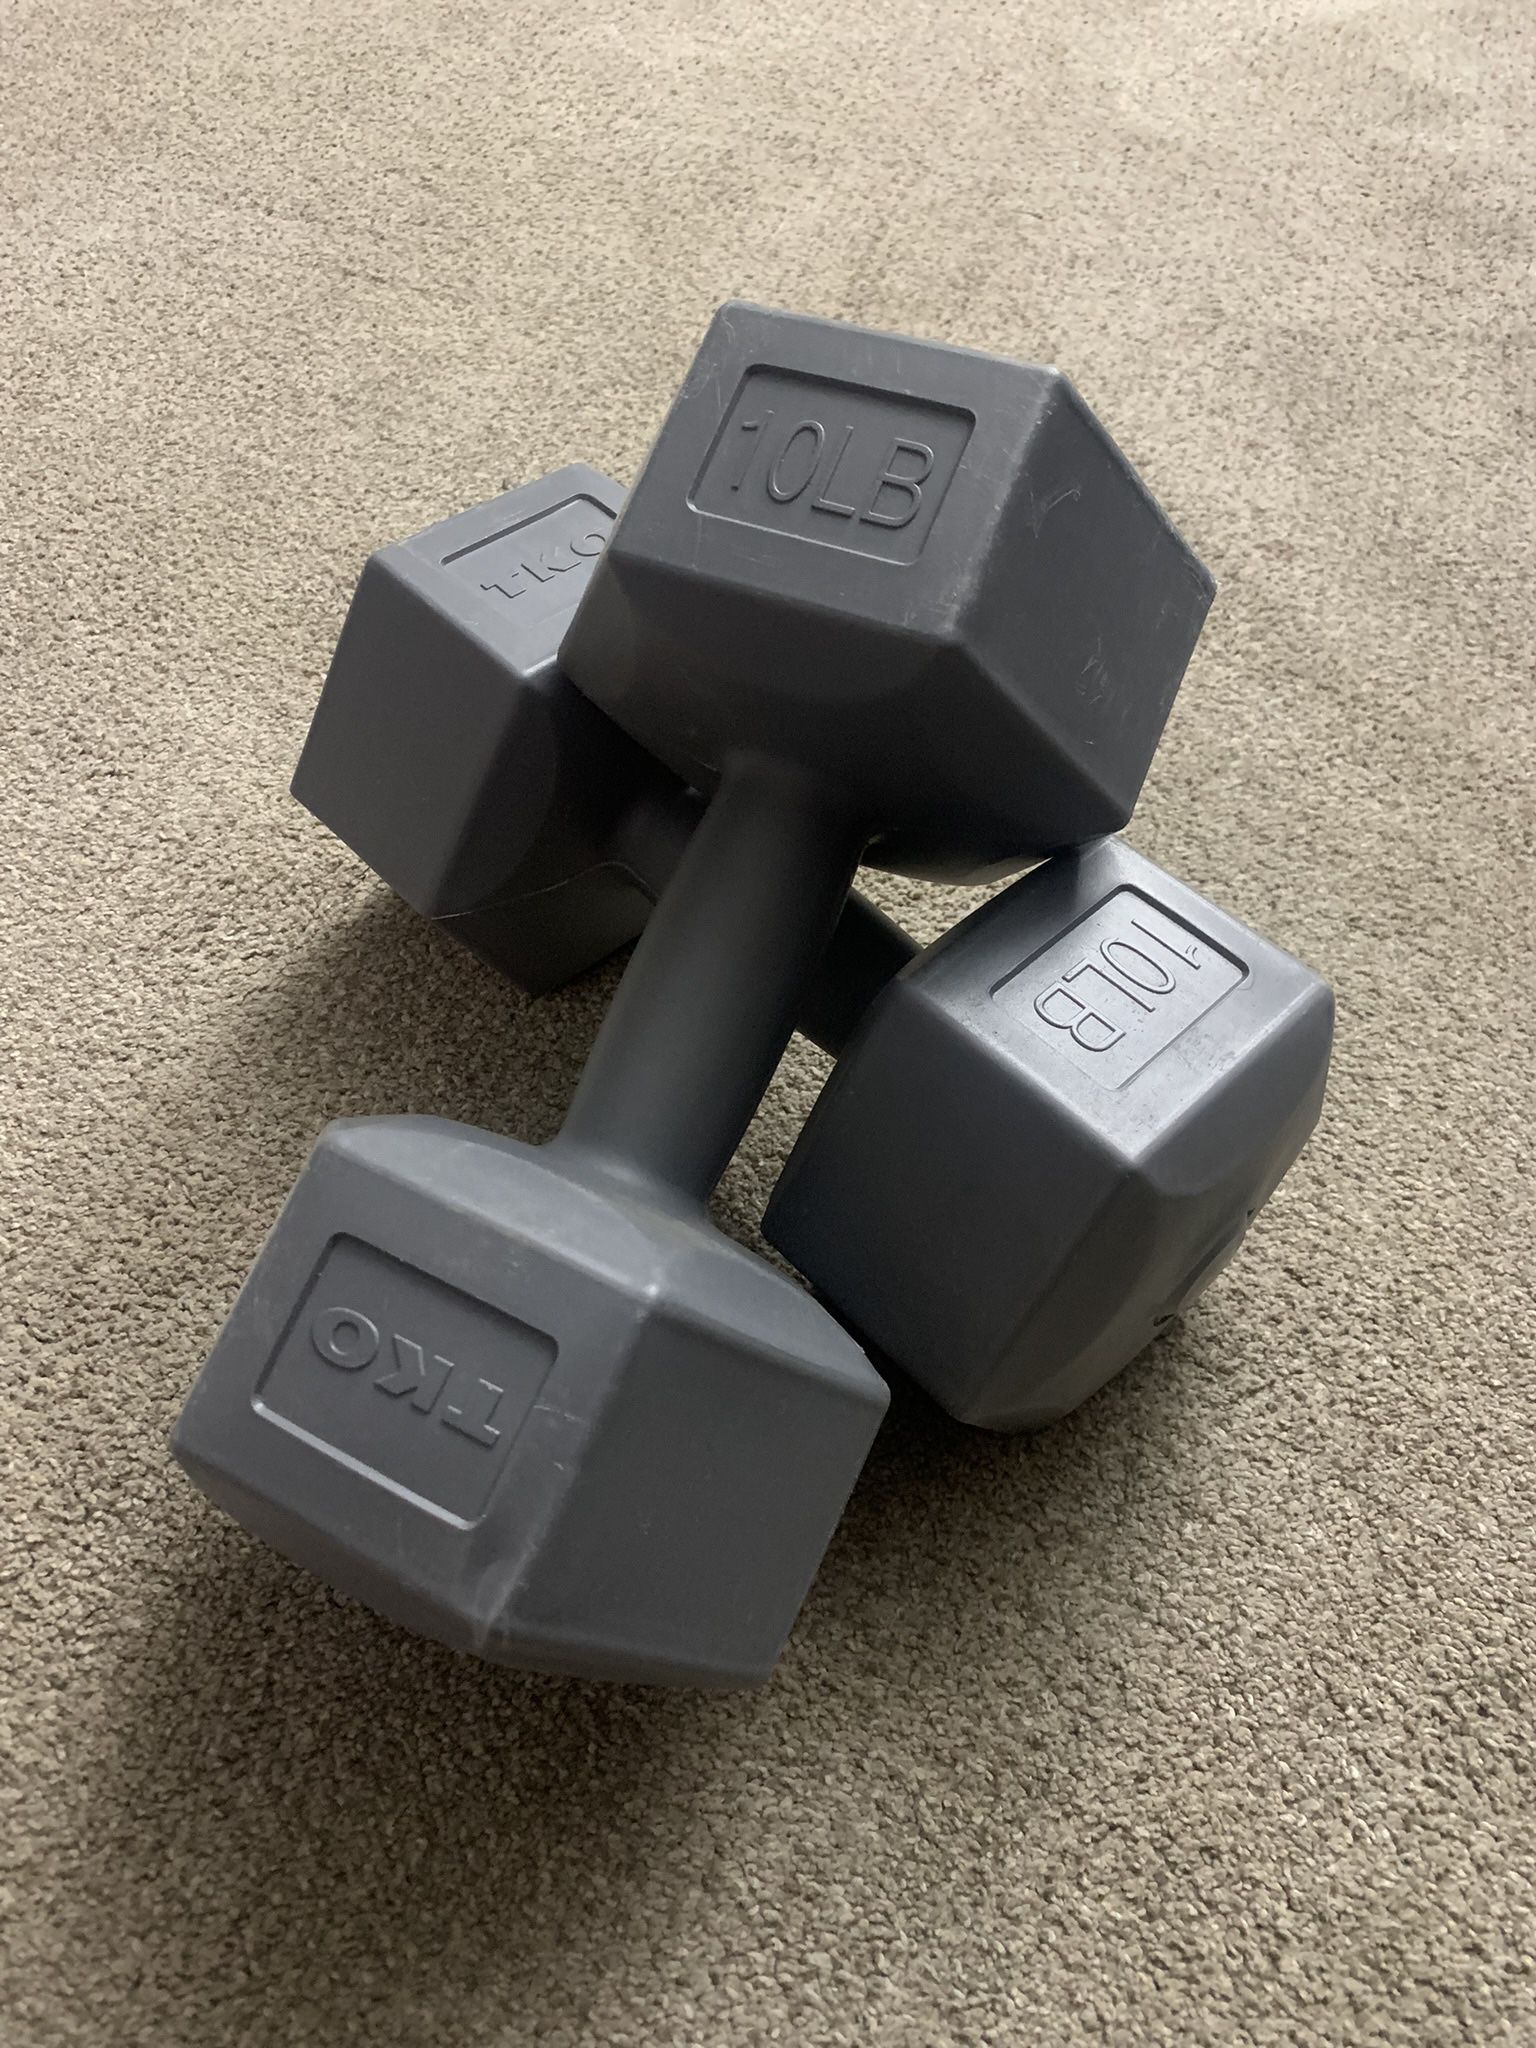 10LB Weights